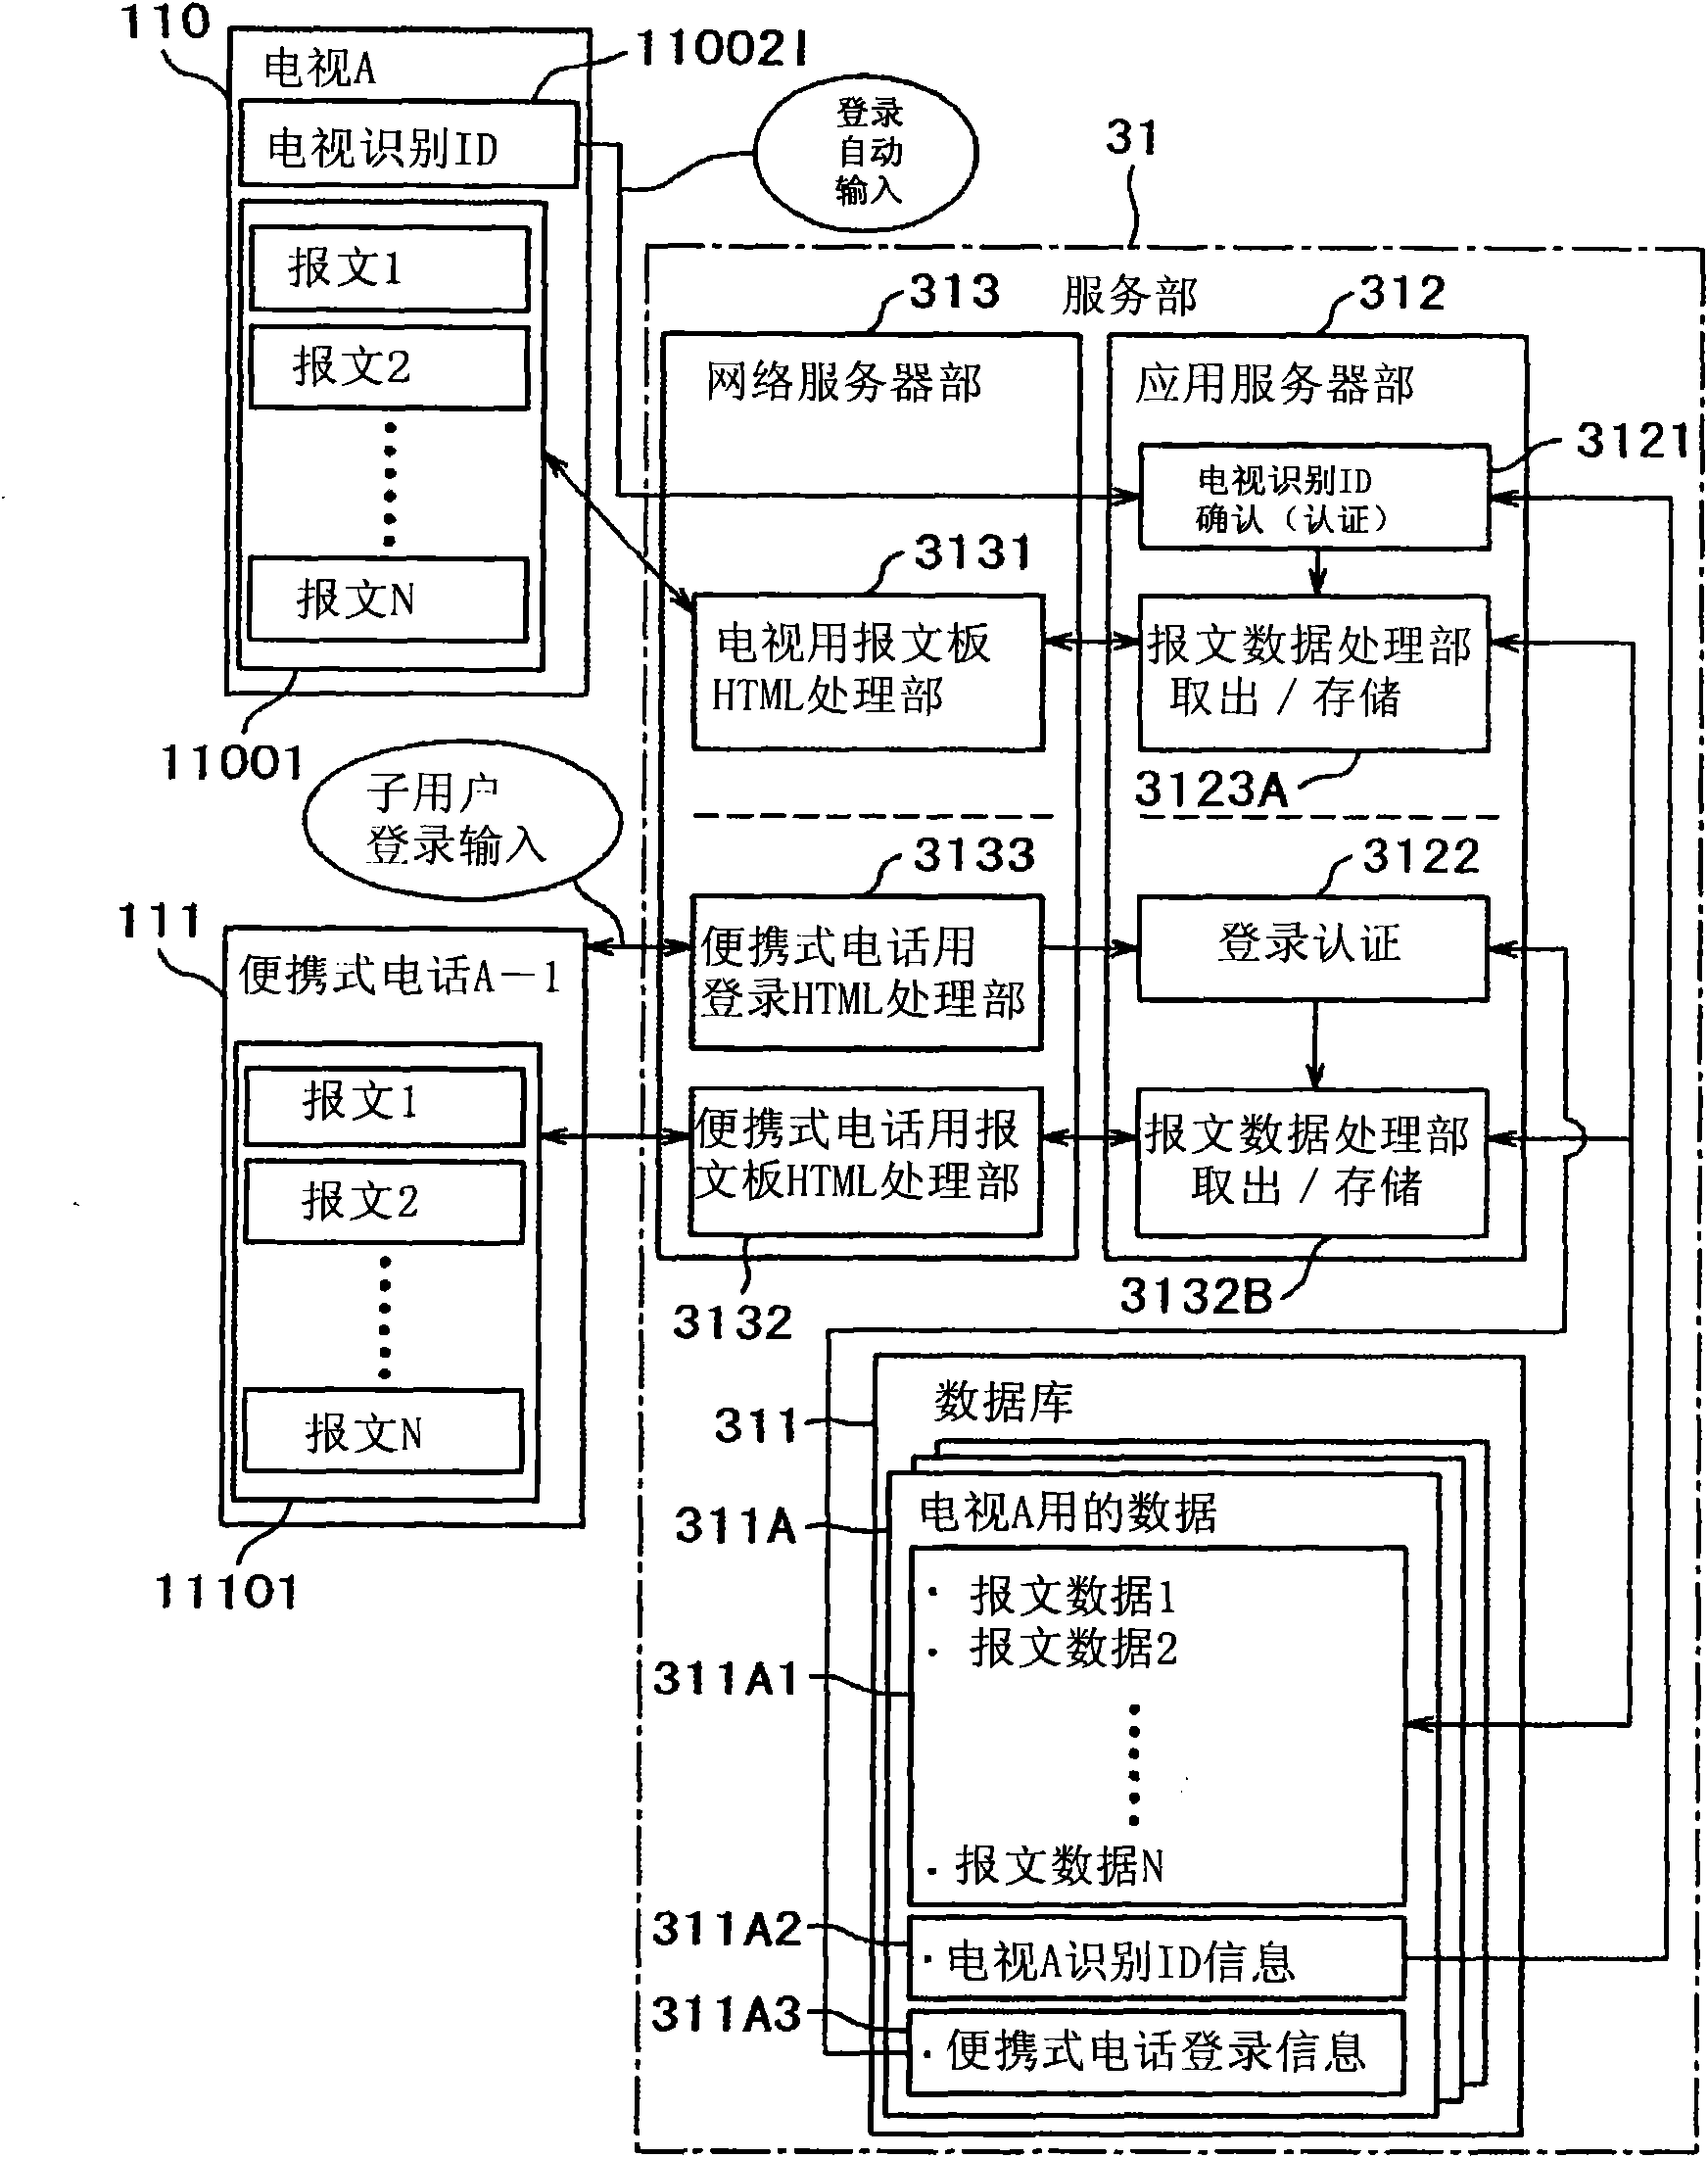 Bulletin board system, terminal device of bulletin board system, and server device of bulletin board system